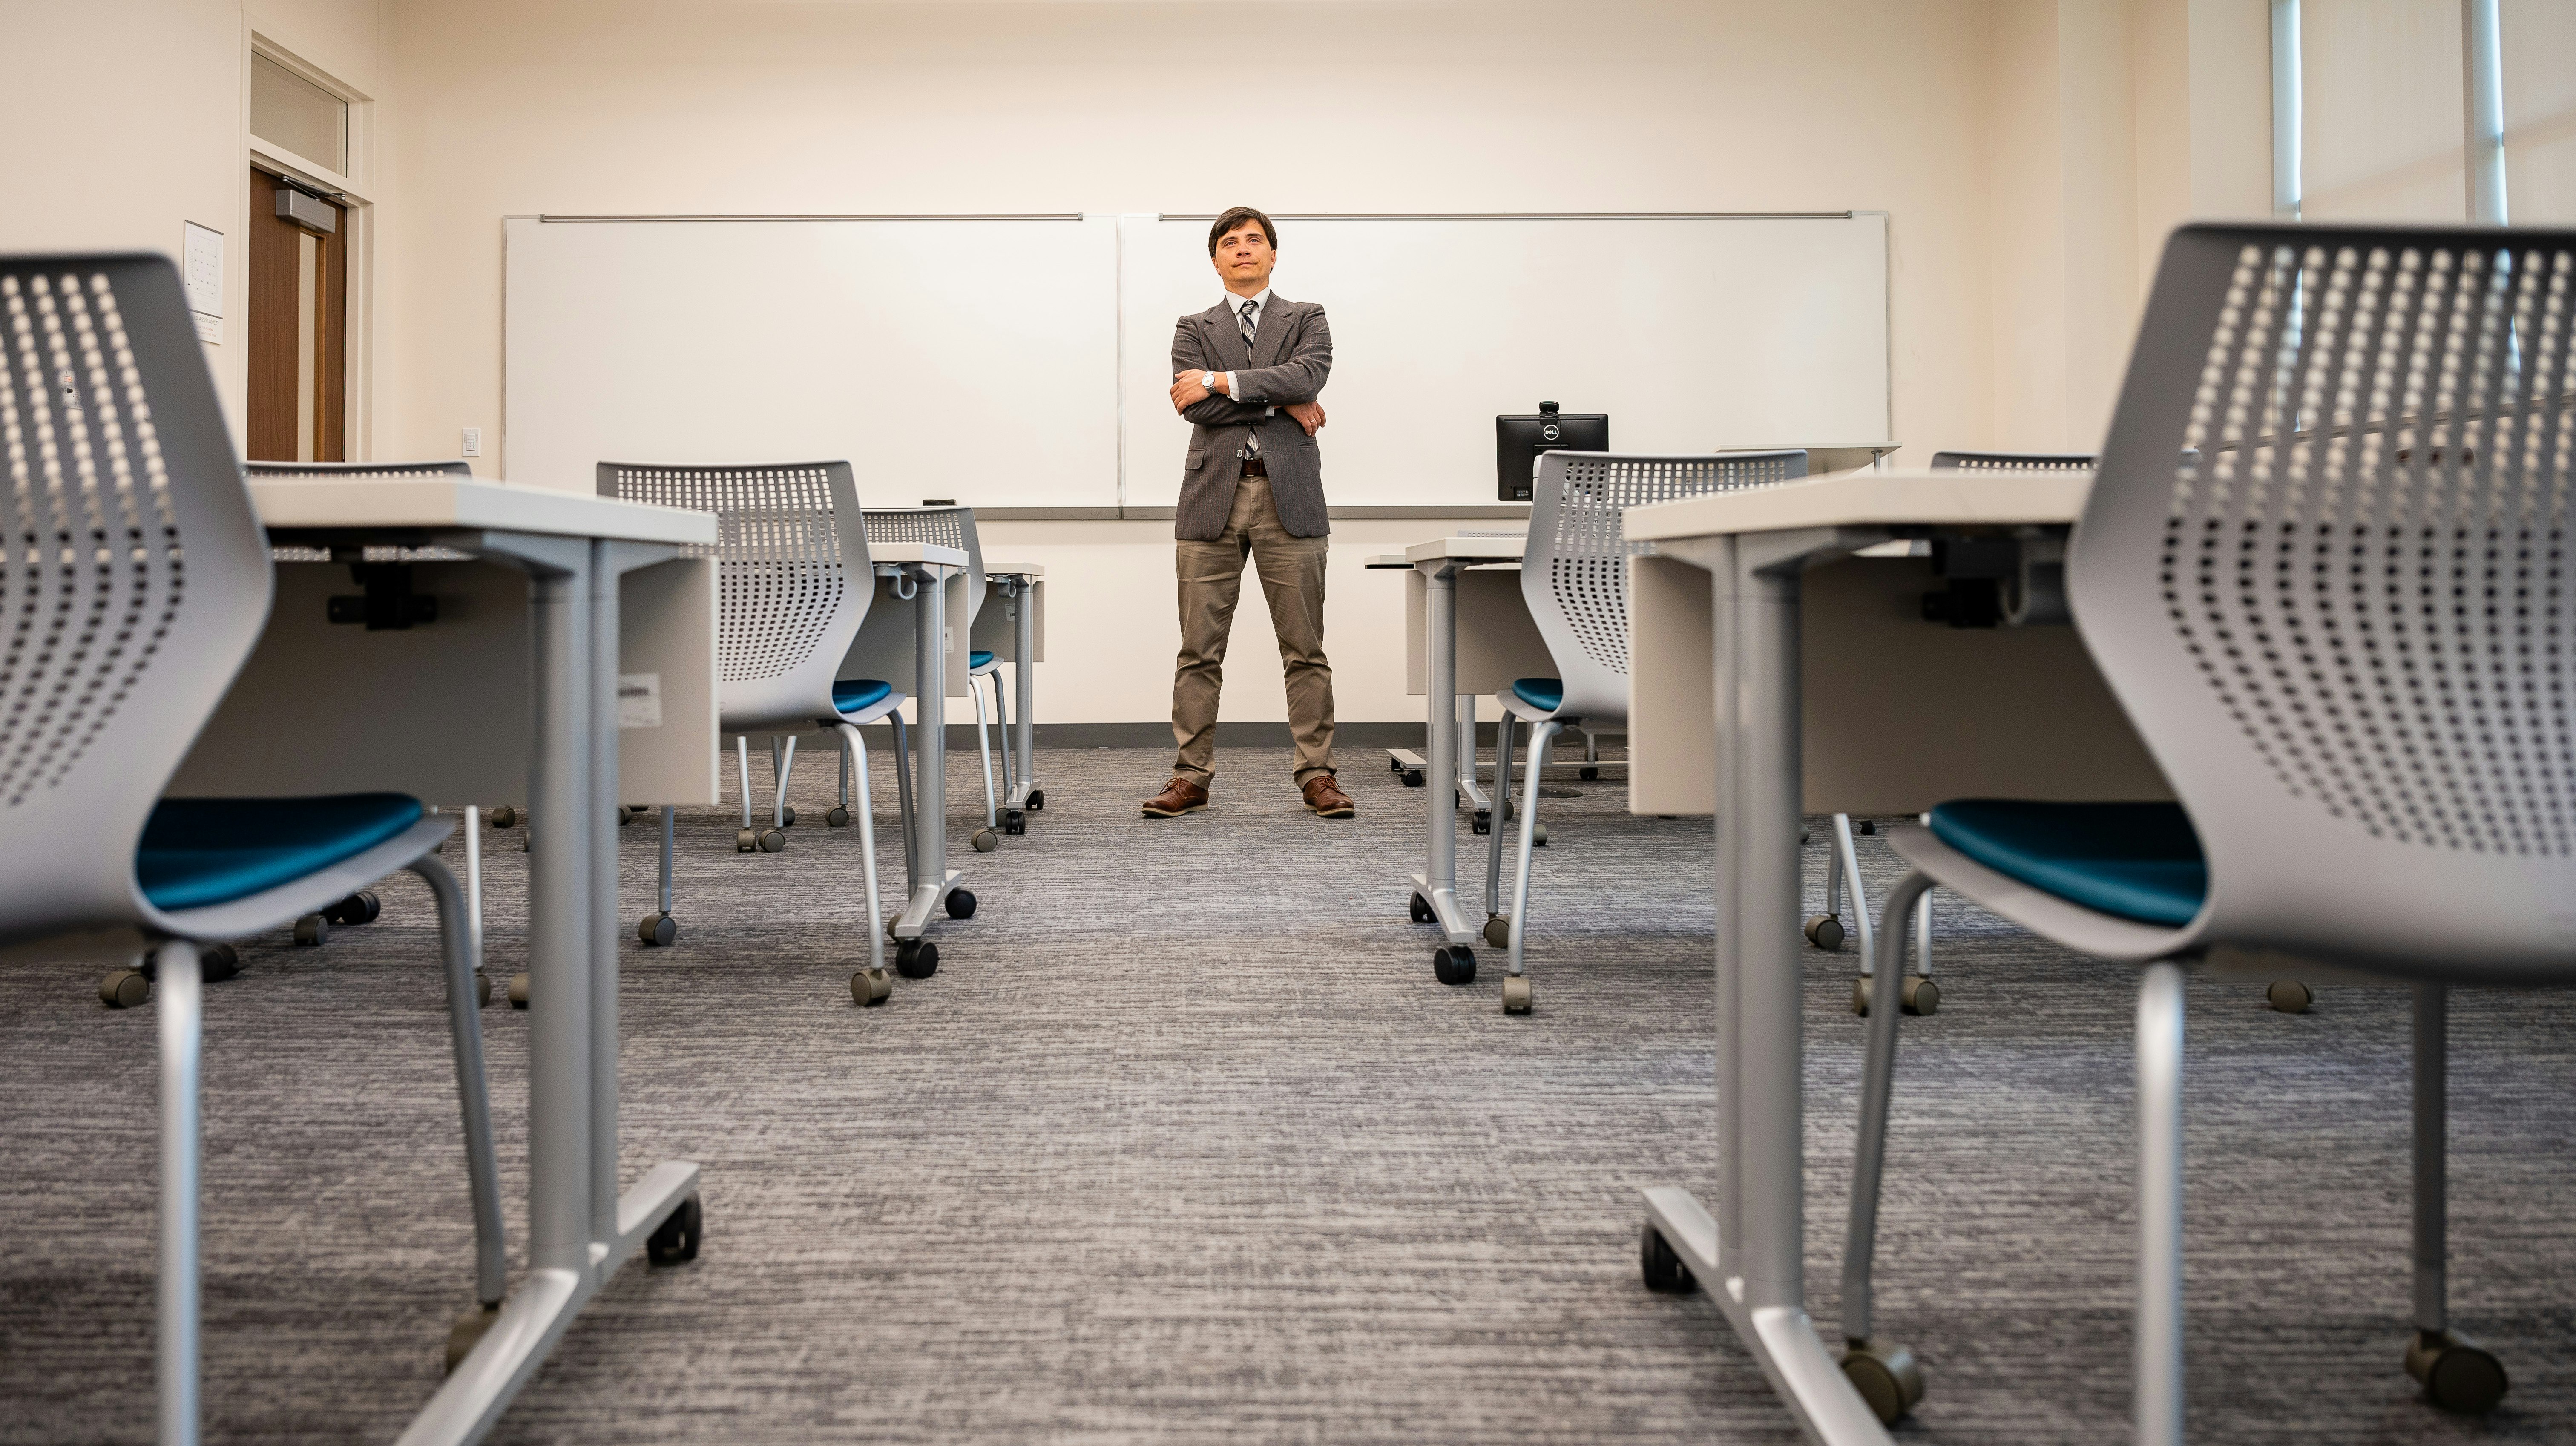 A man stands, arms crossed, in front of a classroom whiteboard. In the foreground, empty chairs.